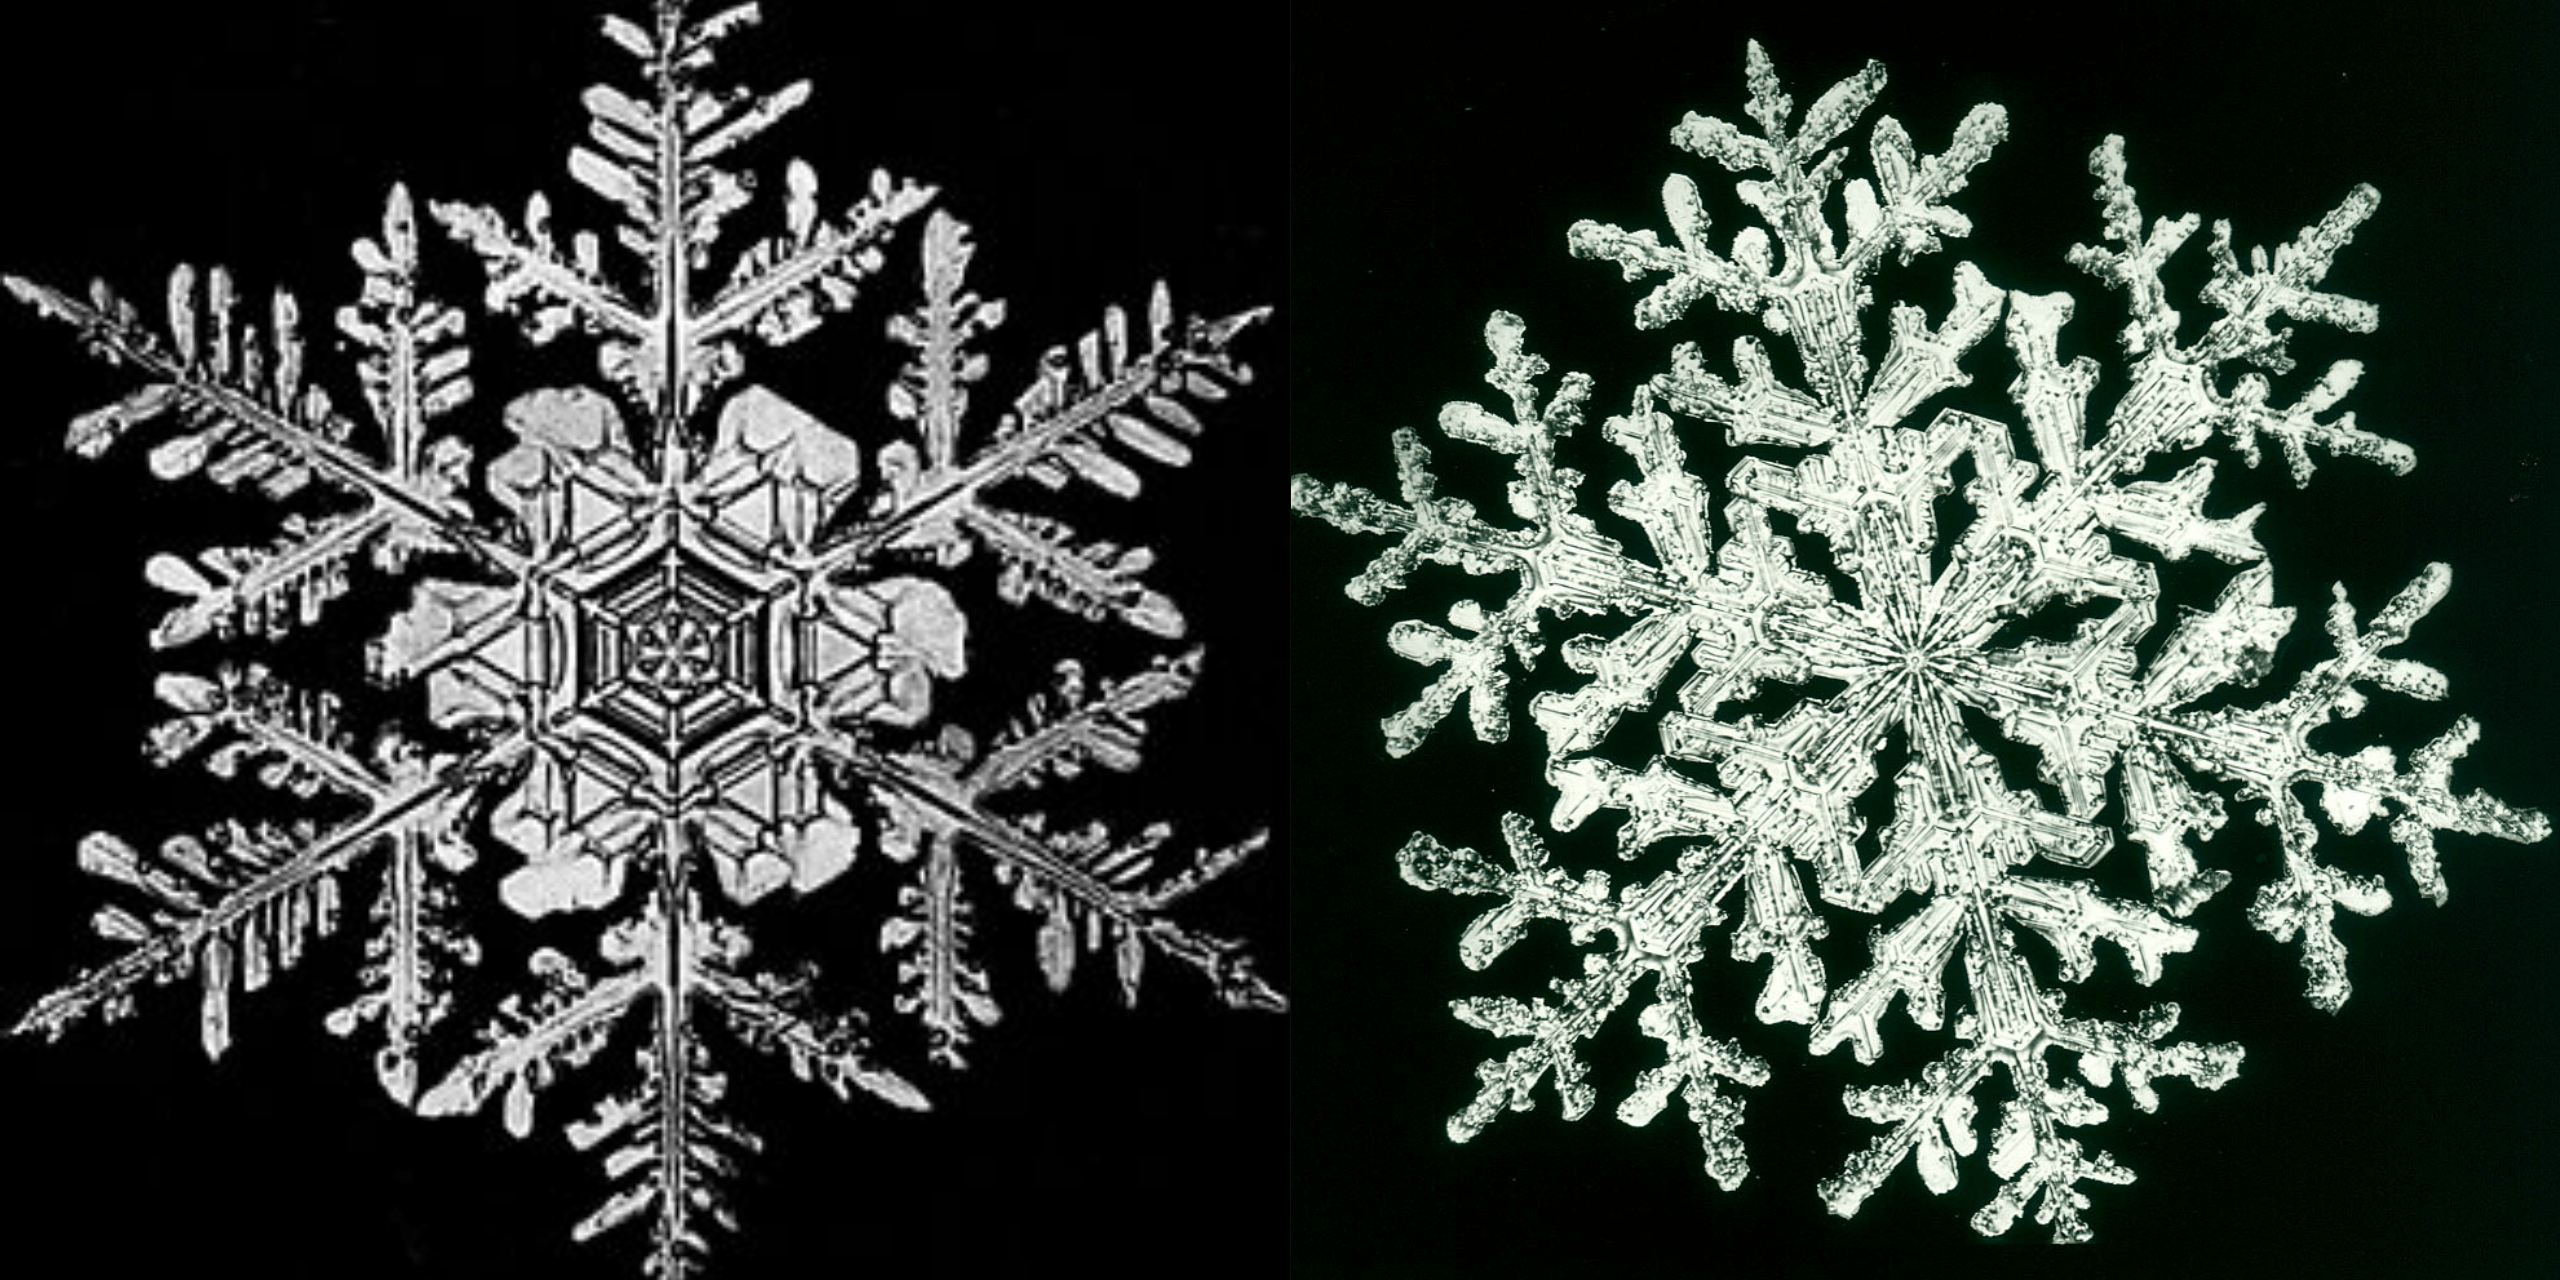 Images of snowflakes, captured by Wilson Bentley. (Courtesy Jericho Historical Society)